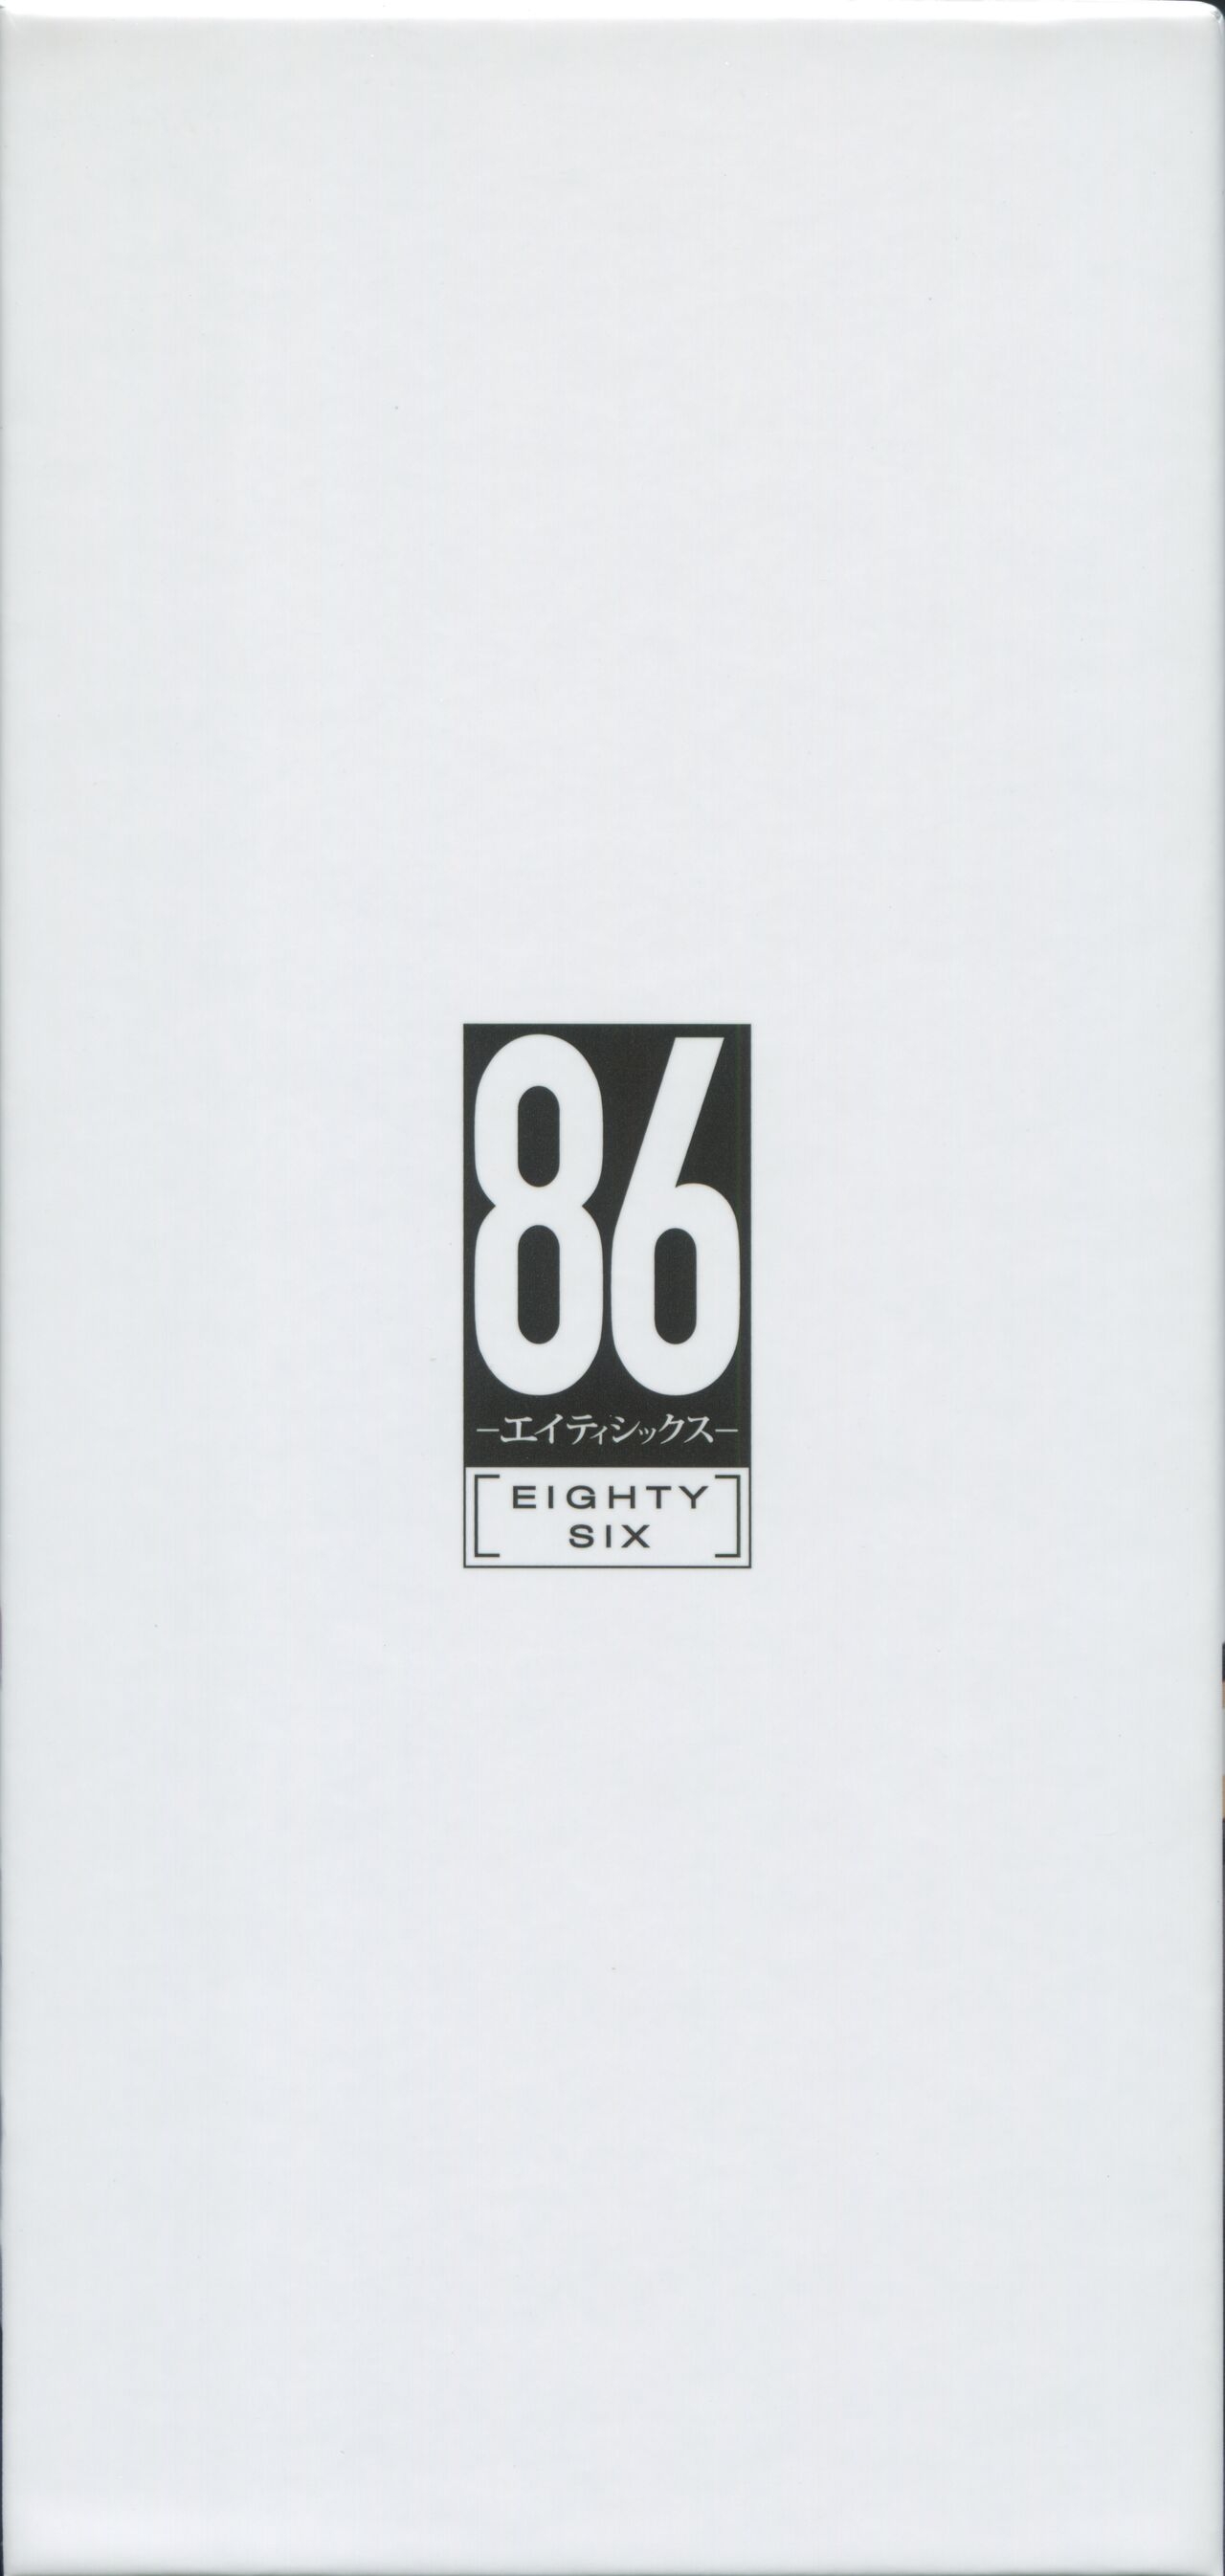 86 Eighty Six BD Scans + Booklet 306